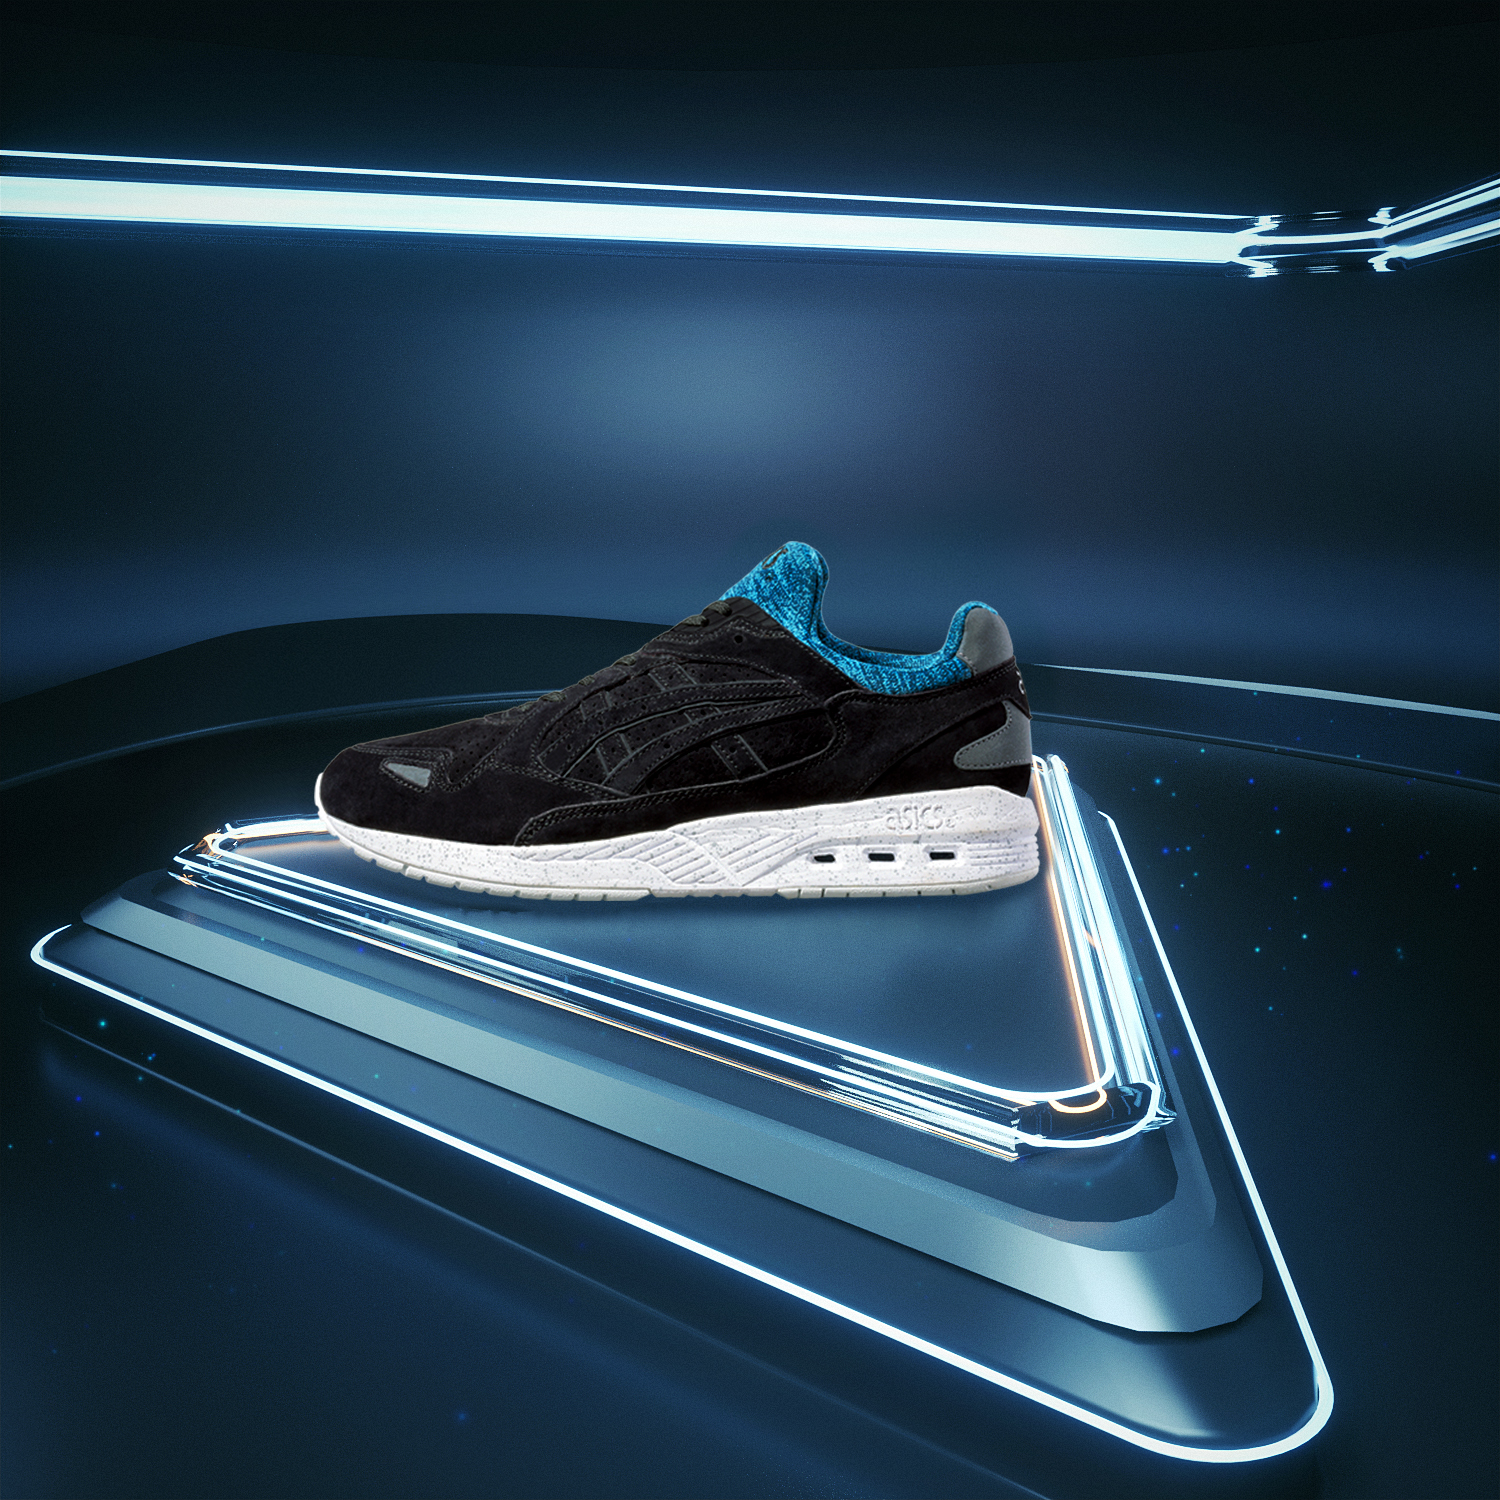 ASICS Bring Out 3 Clean New ASICS models | Complex